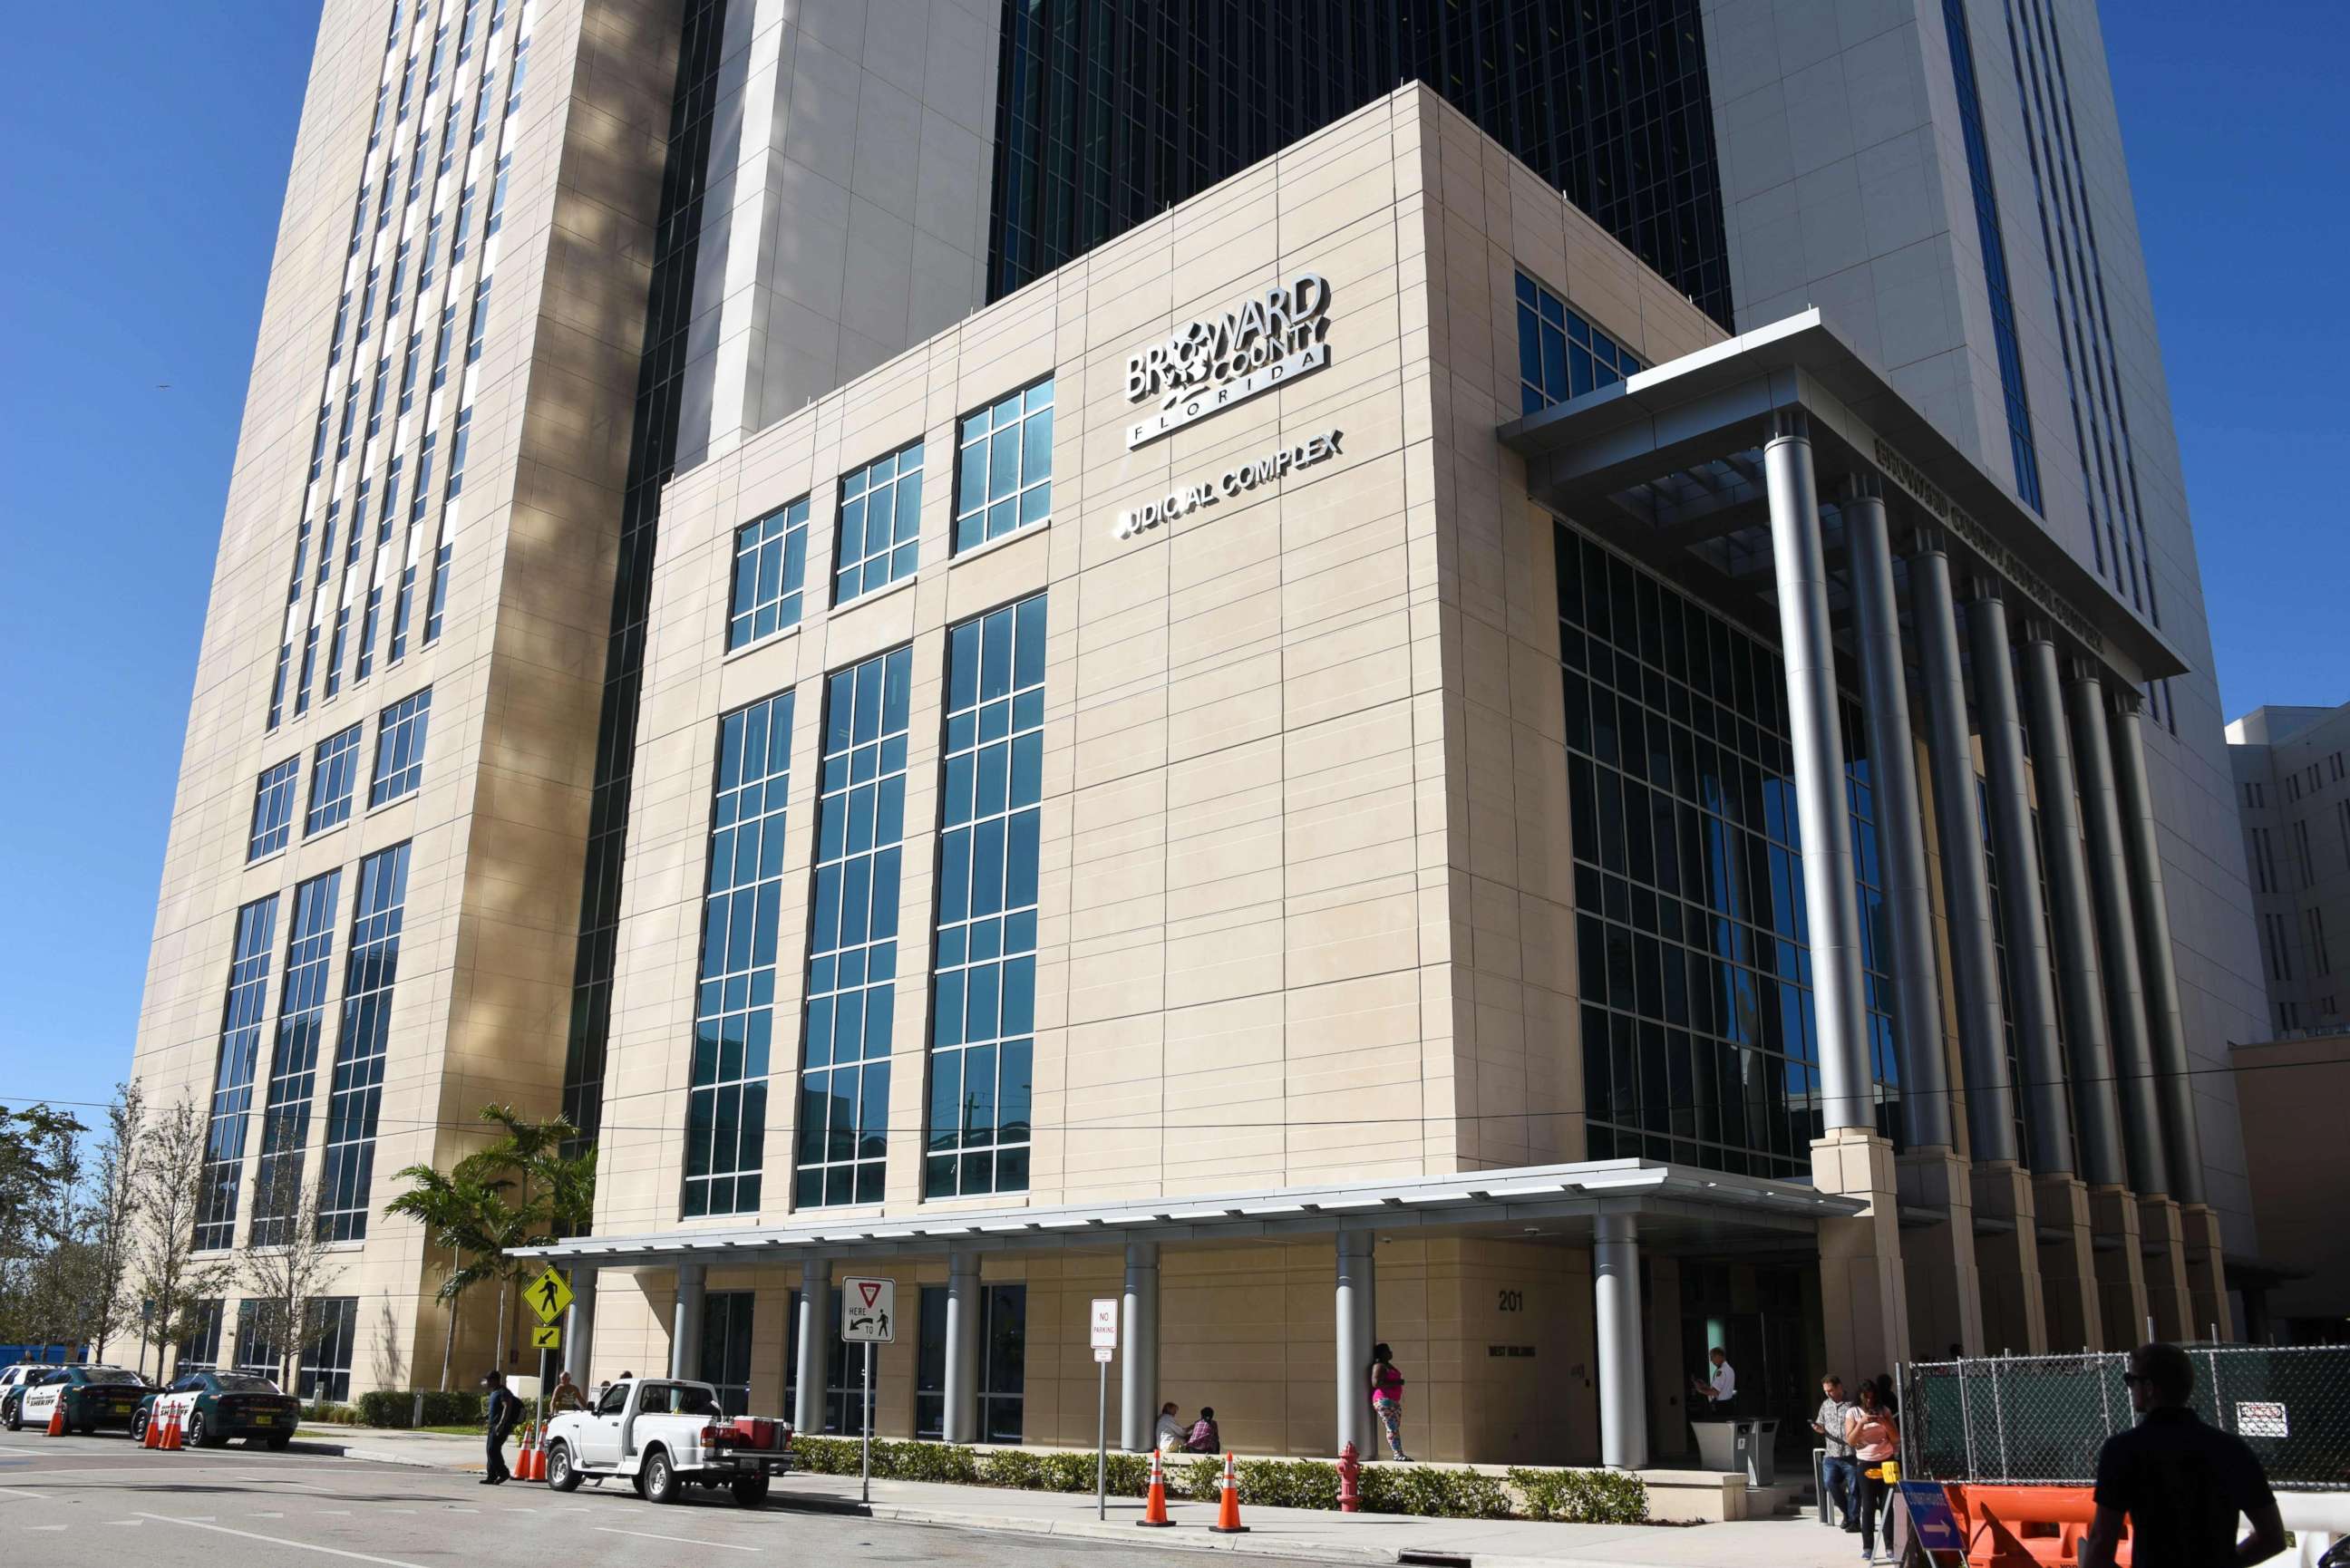 PHOTO: The Broward County Courthouse where high school shooter Nikolas Cruz was brought in for sentencing and detained in the adjacent jail, in Fort Lauderdale, Fla., Feb. 15, 2018.